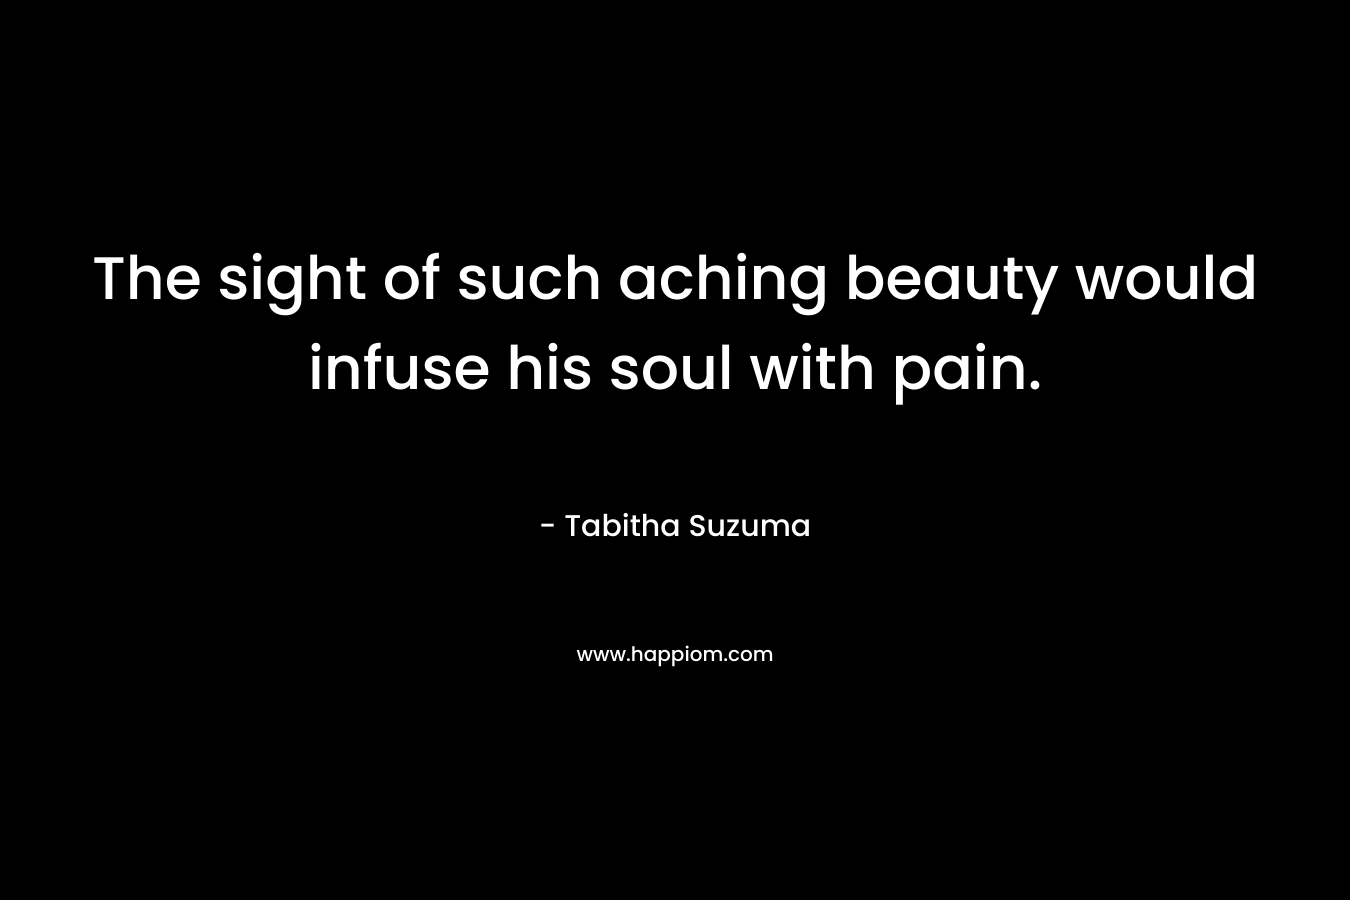 The sight of such aching beauty would infuse his soul with pain. – Tabitha Suzuma